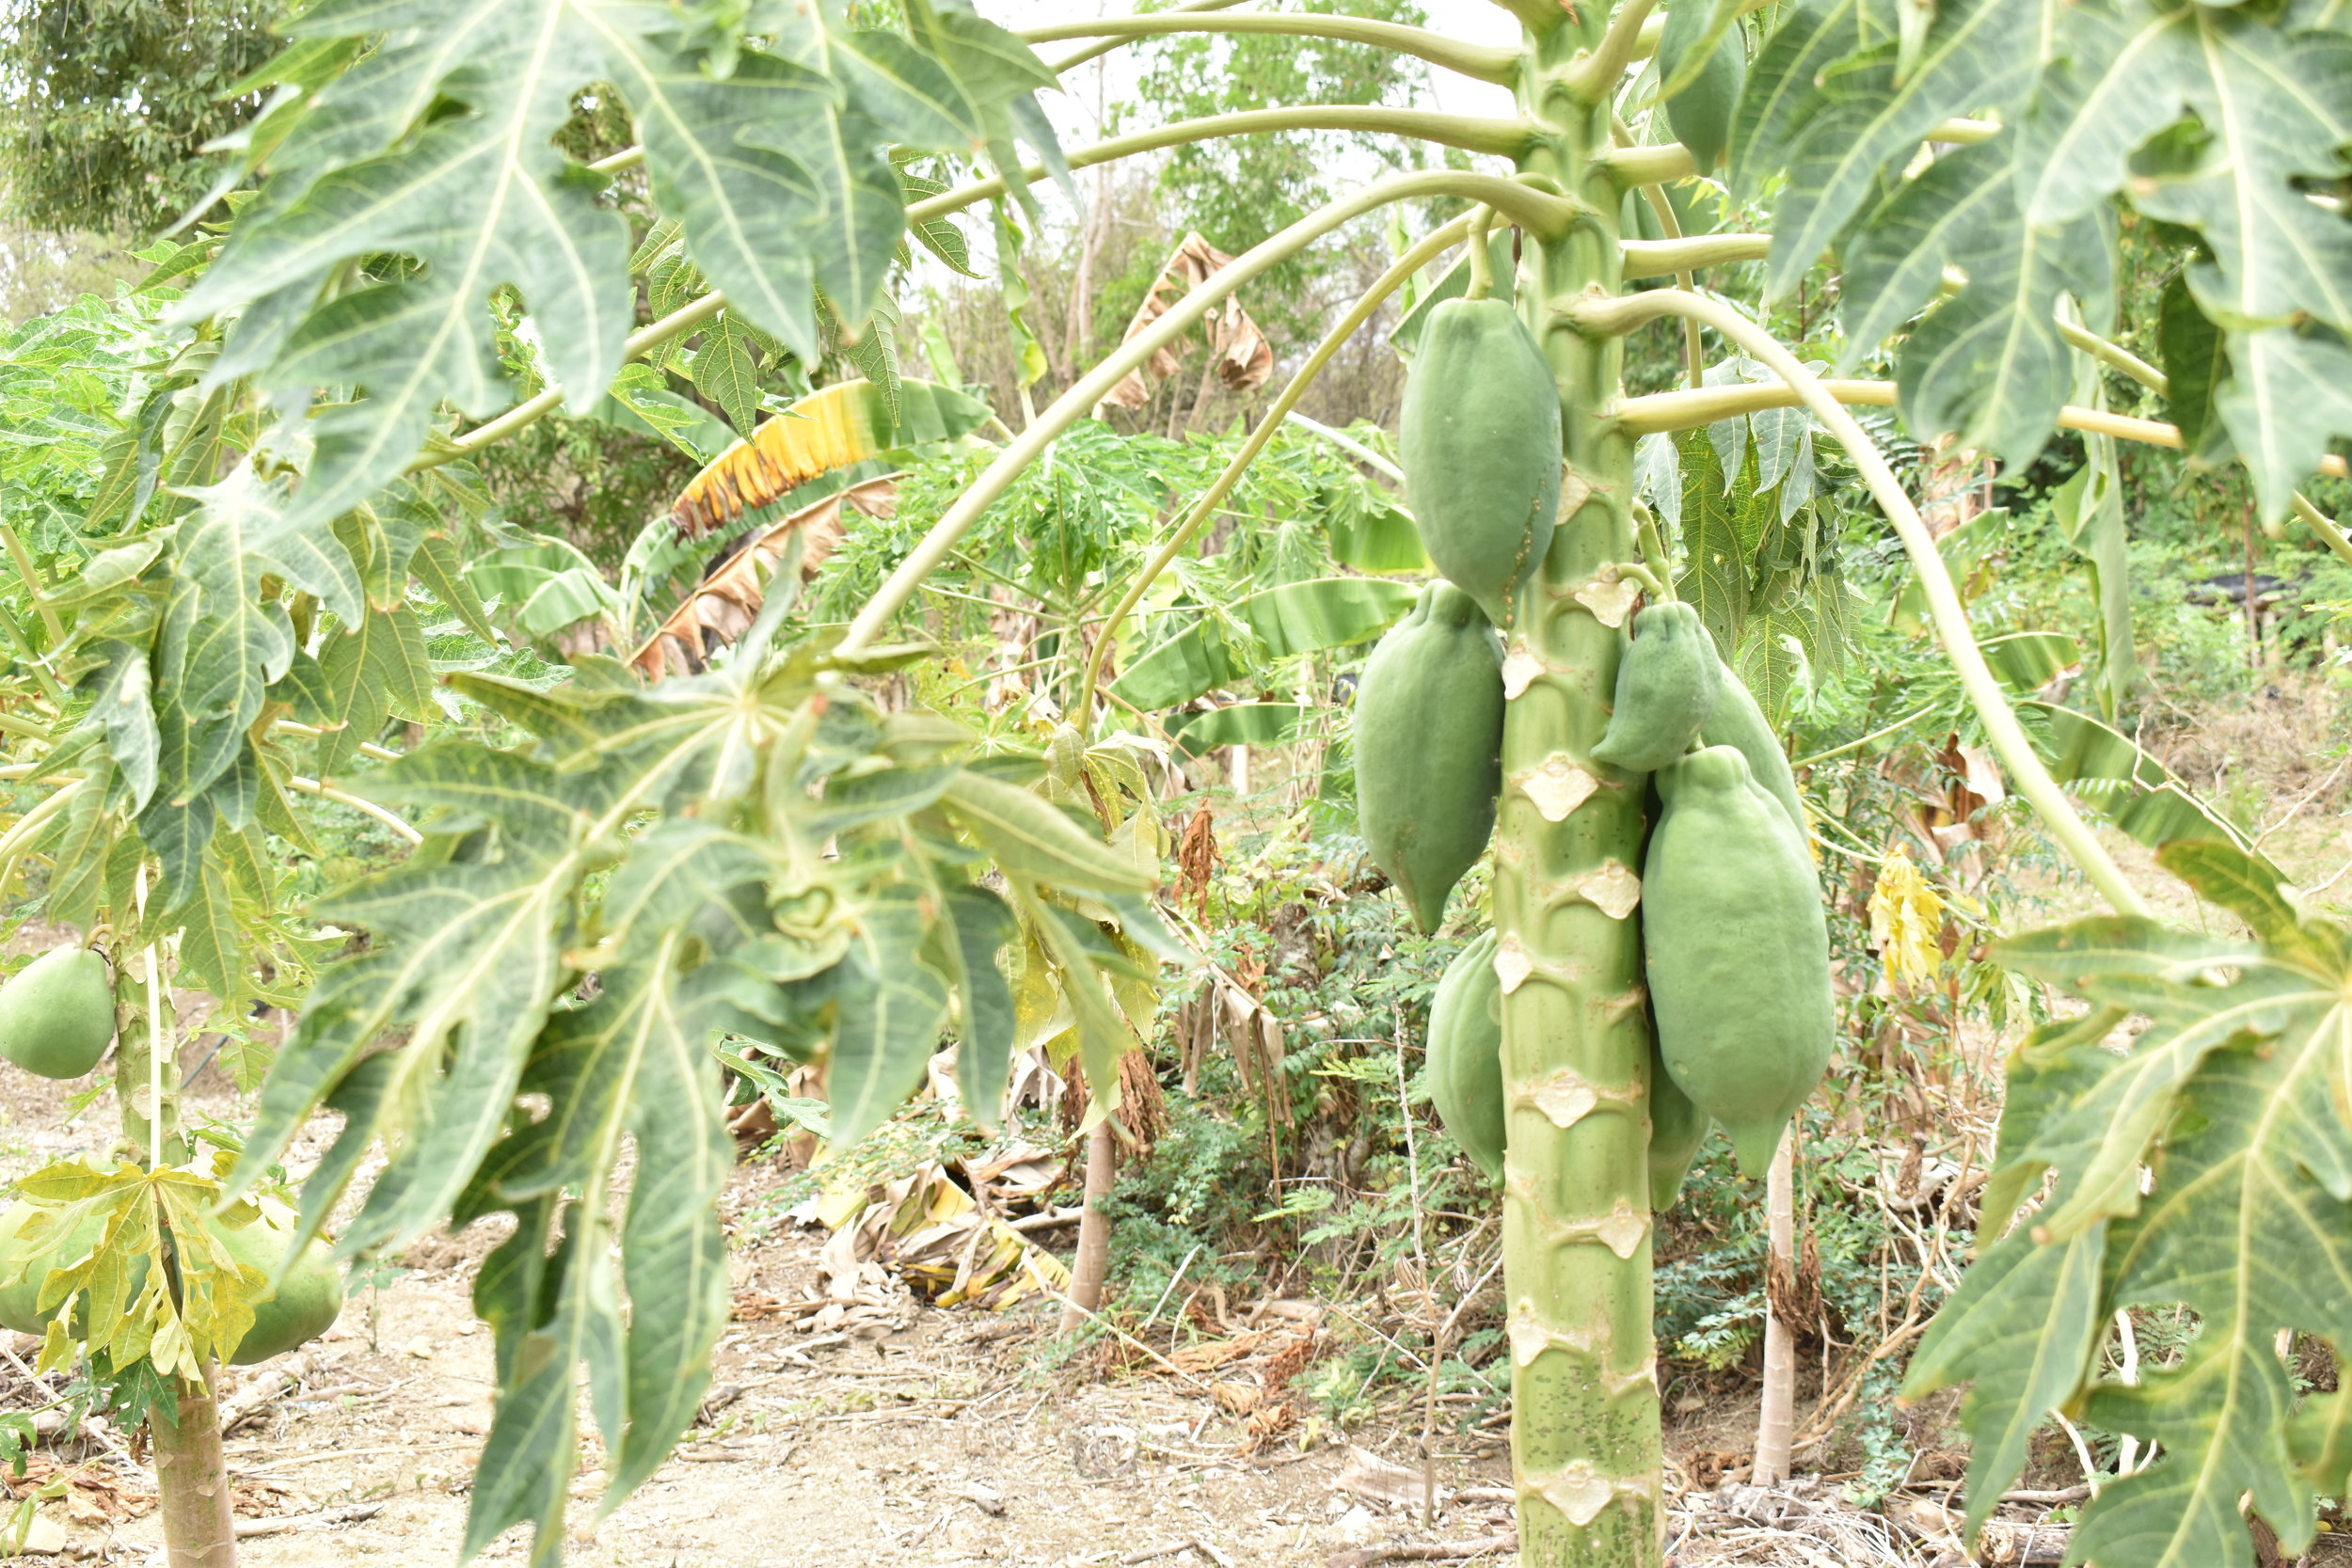  The central plateau grows large and tasty papaya which we enjoyed each day we were on our trip. 